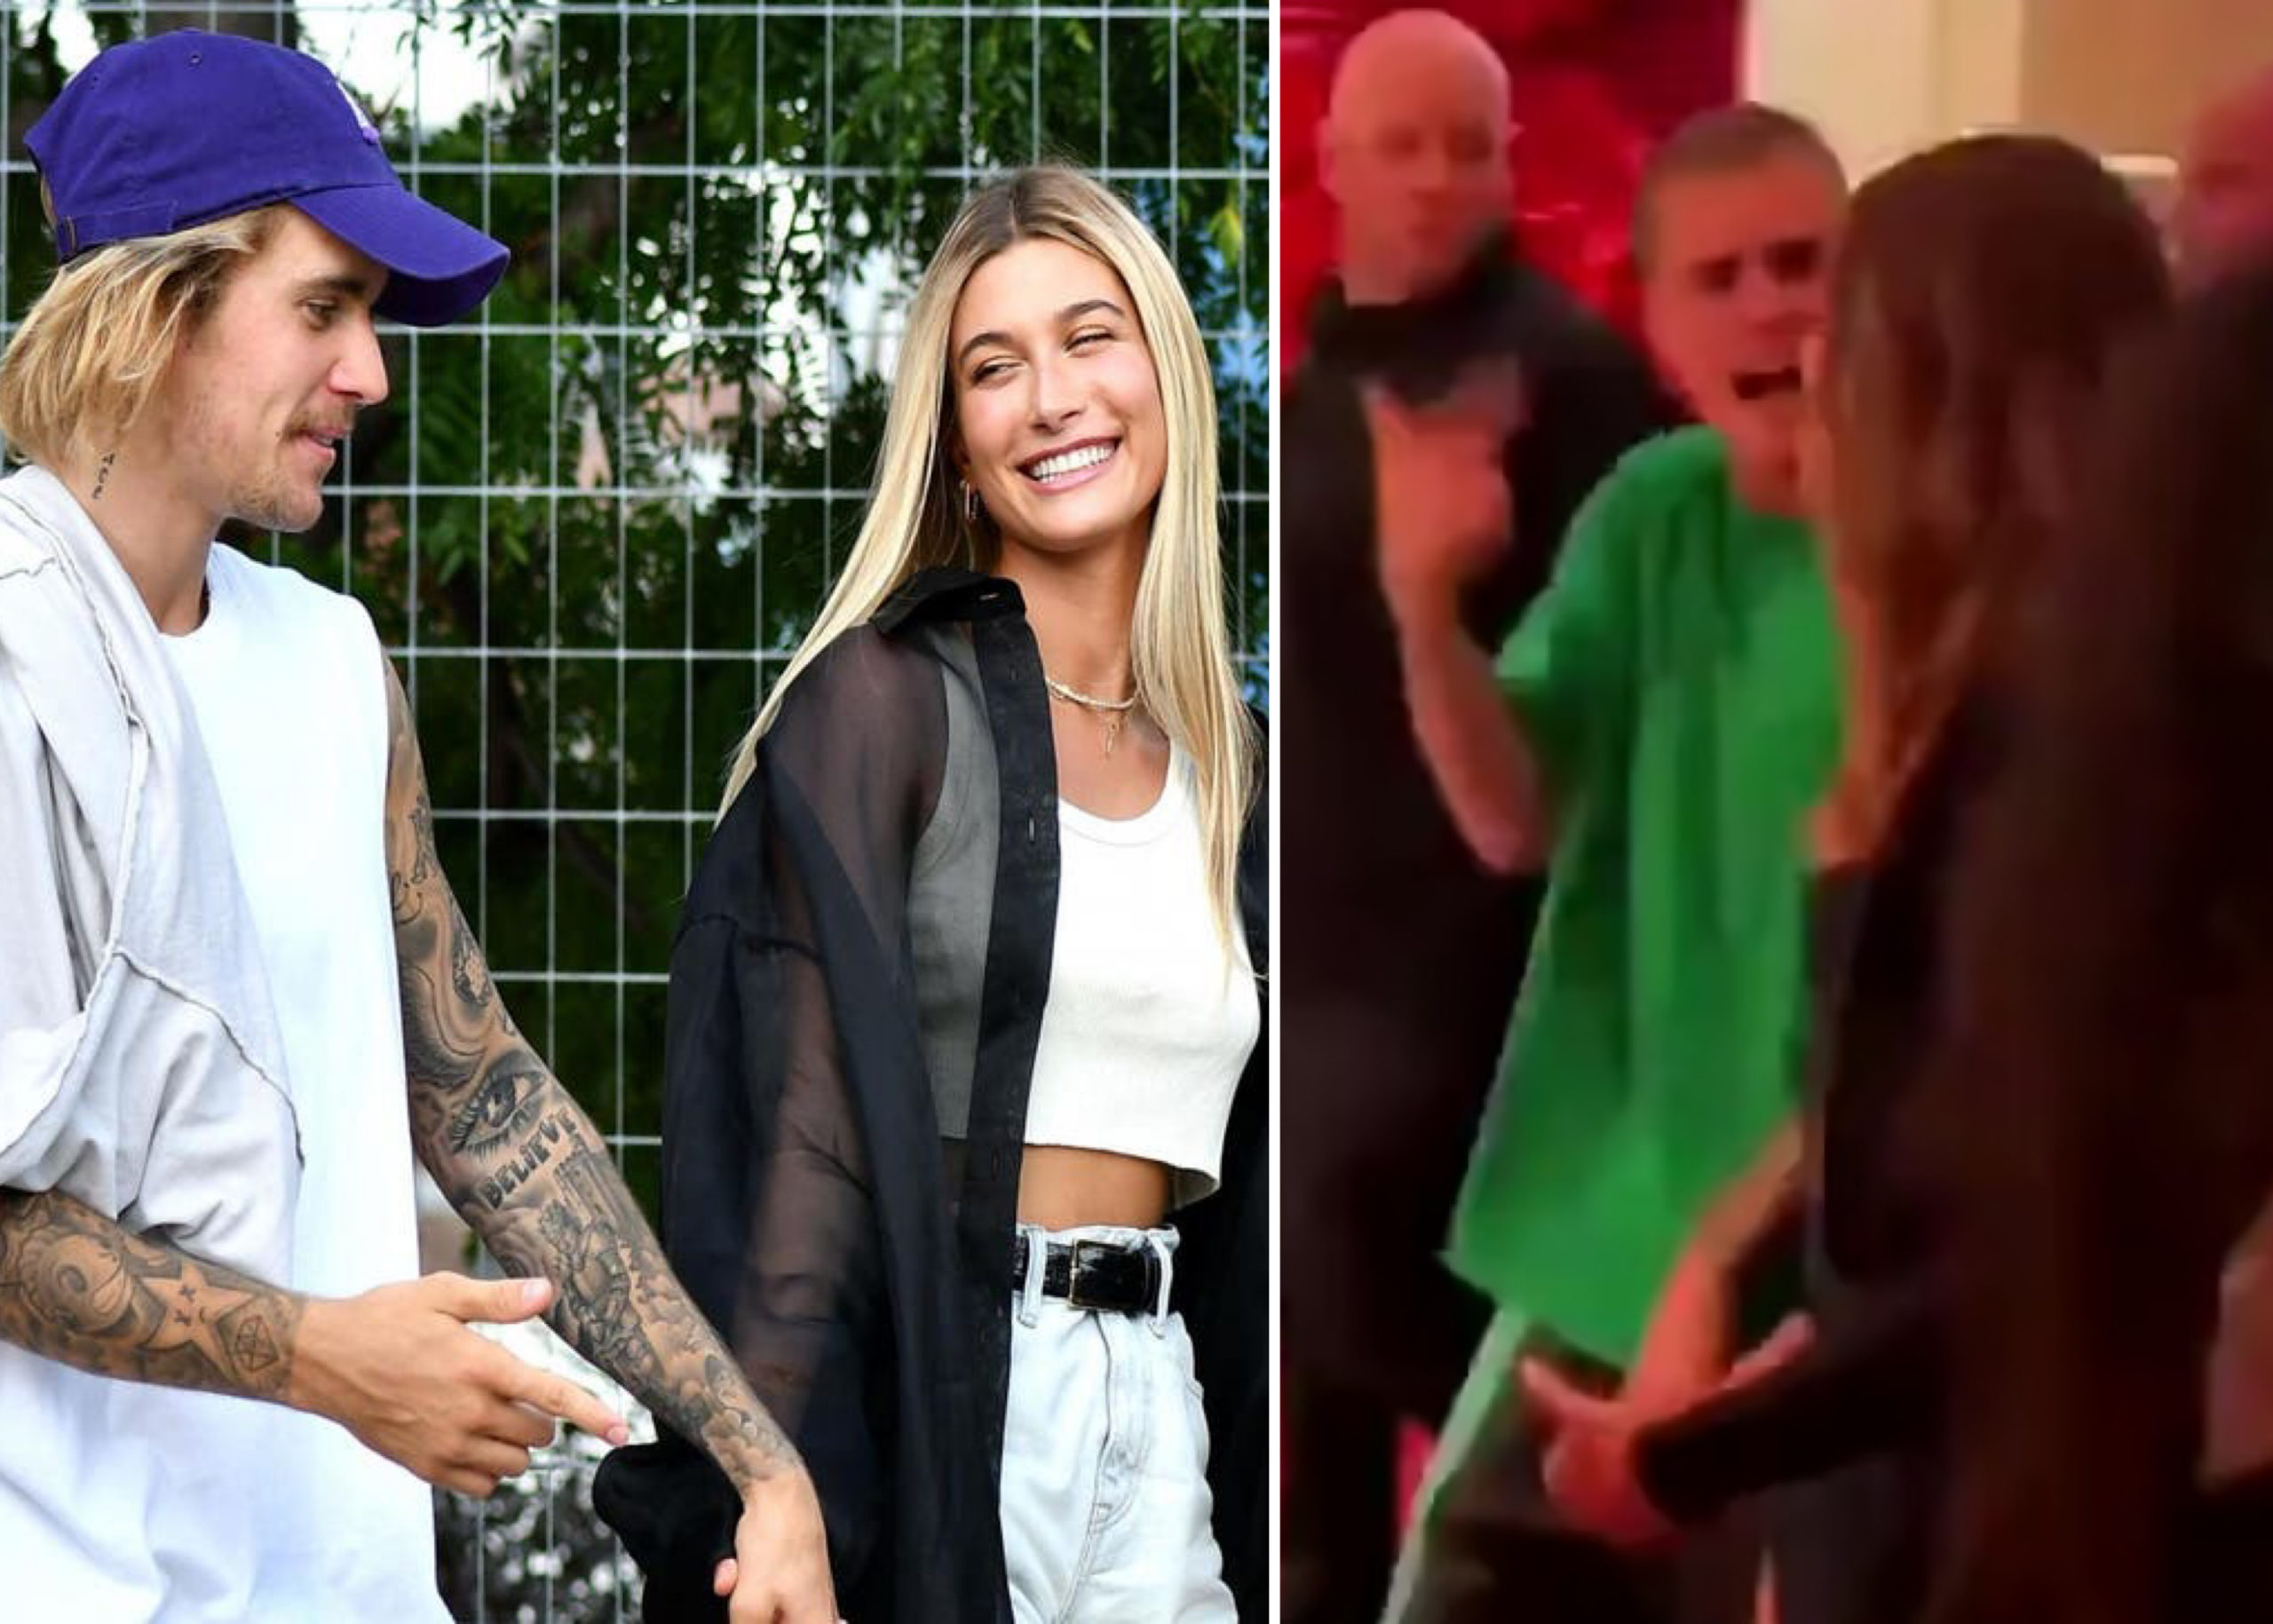 Hailey Baldwin Dismisses Claims That Husband, Justin Bieber Was ‘Yelling’ At Her In Viral Video